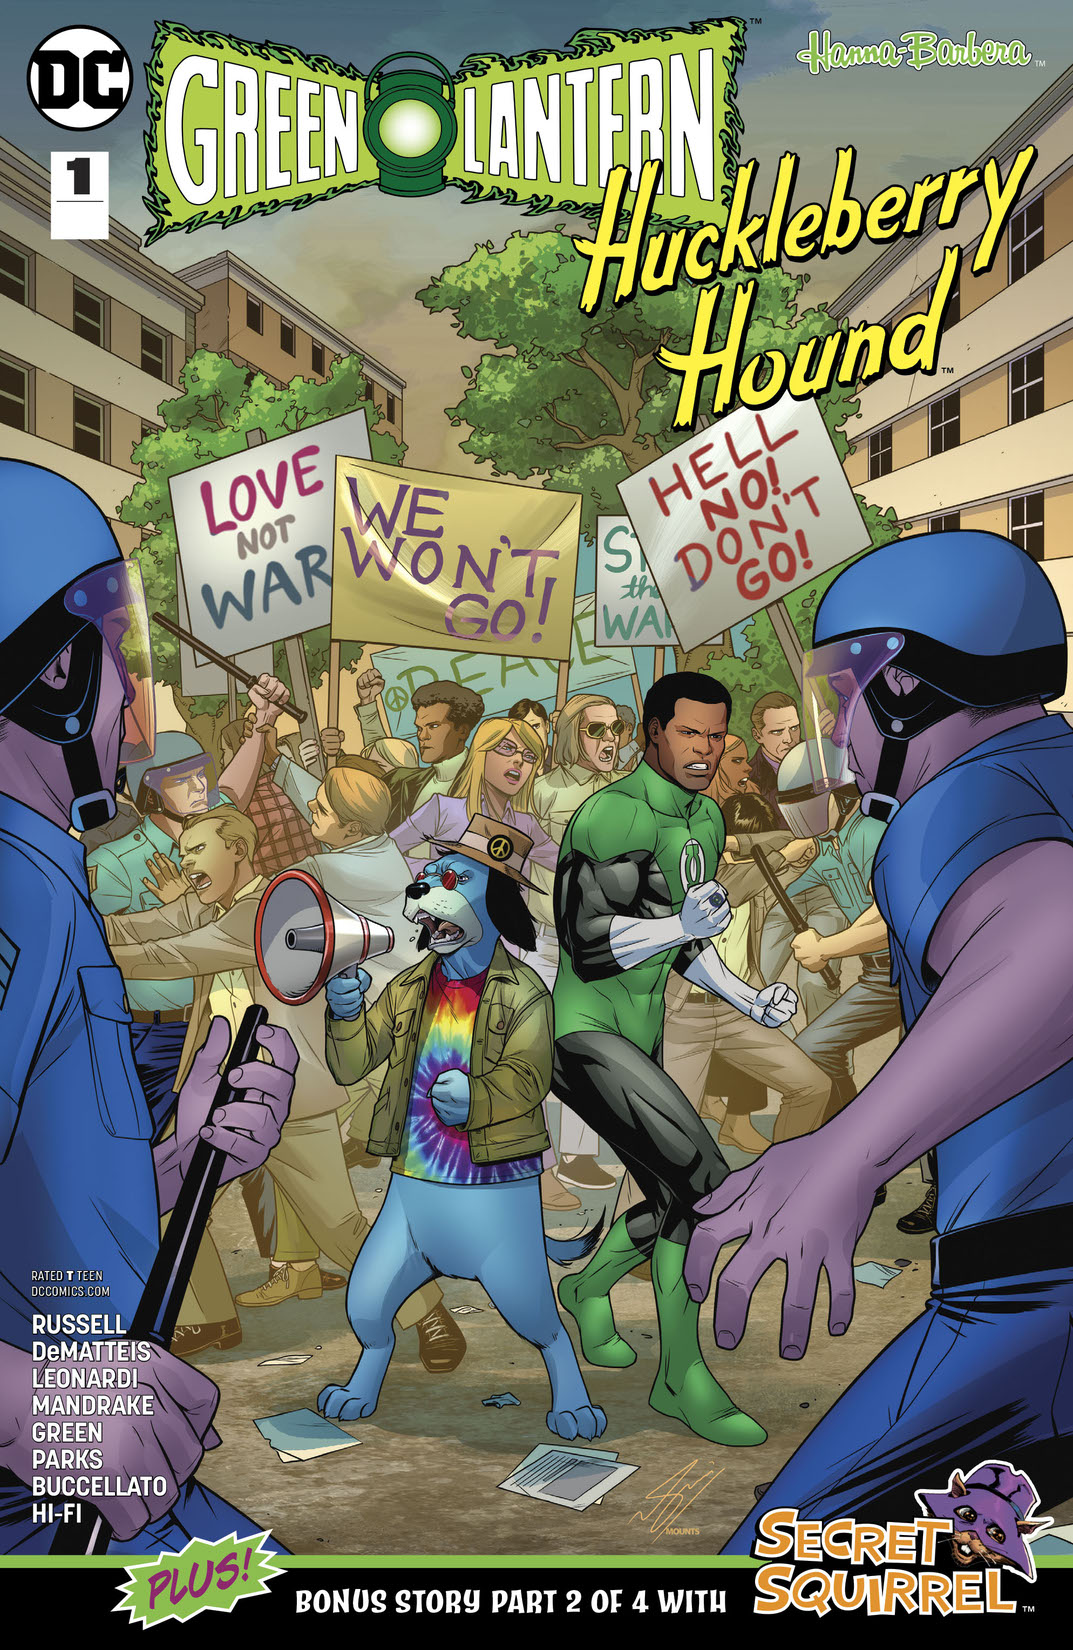 Green Lantern/Huckleberry Hound Special #1 preview images